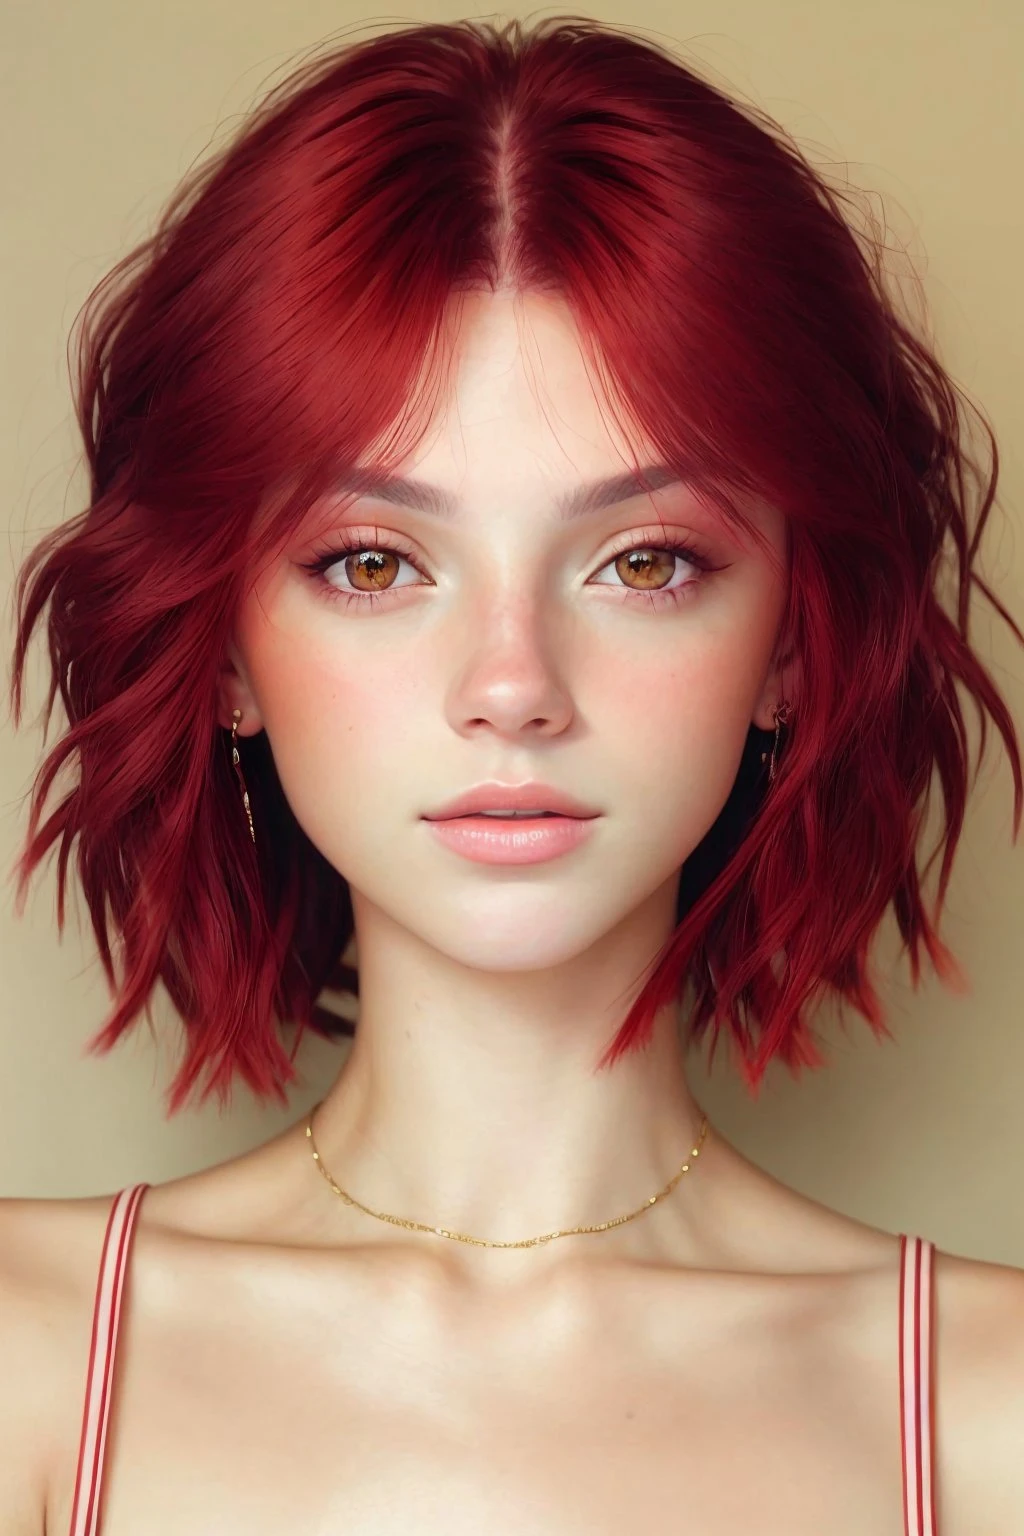 SavannahRaeDemers, focus on eyes, close up on face, wearing jewelry, light red hair styled A-line bob hair